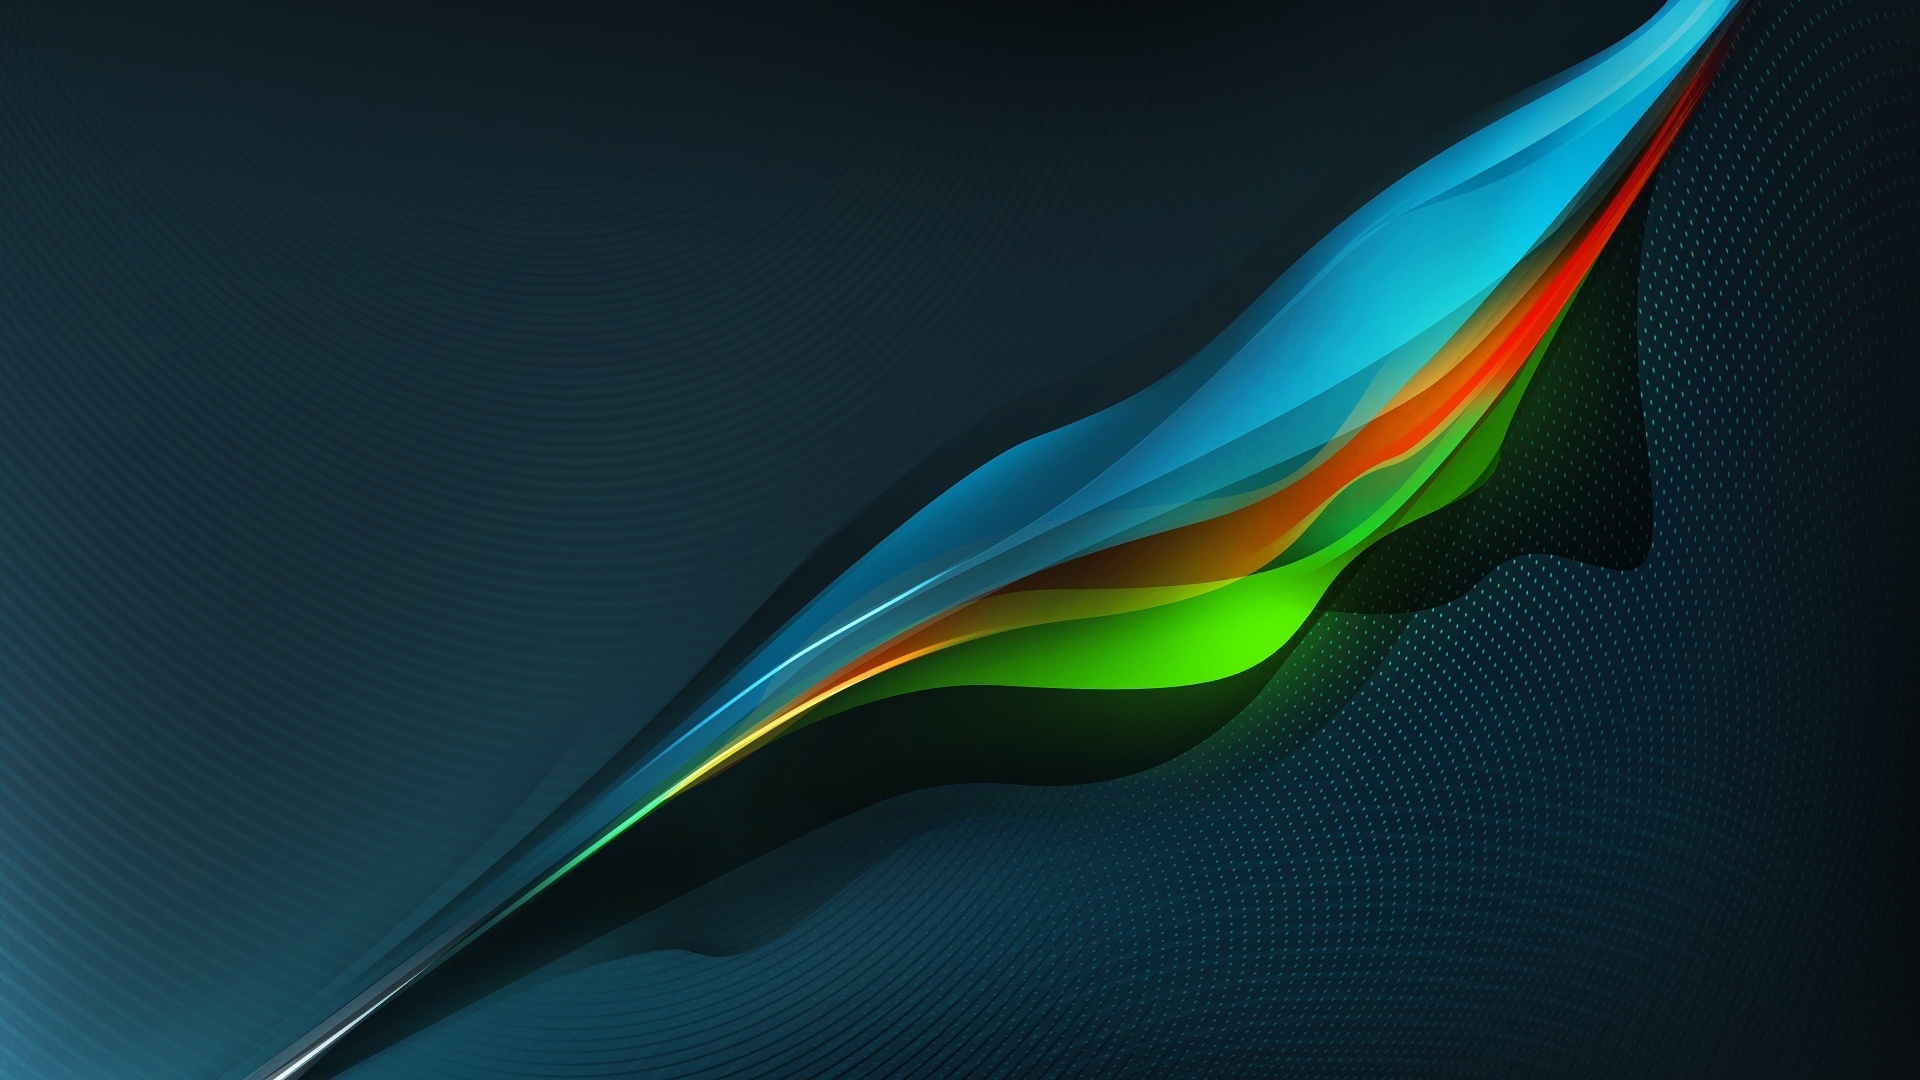 Colourful Waves for 1920 x 1080 HDTV 1080p resolution